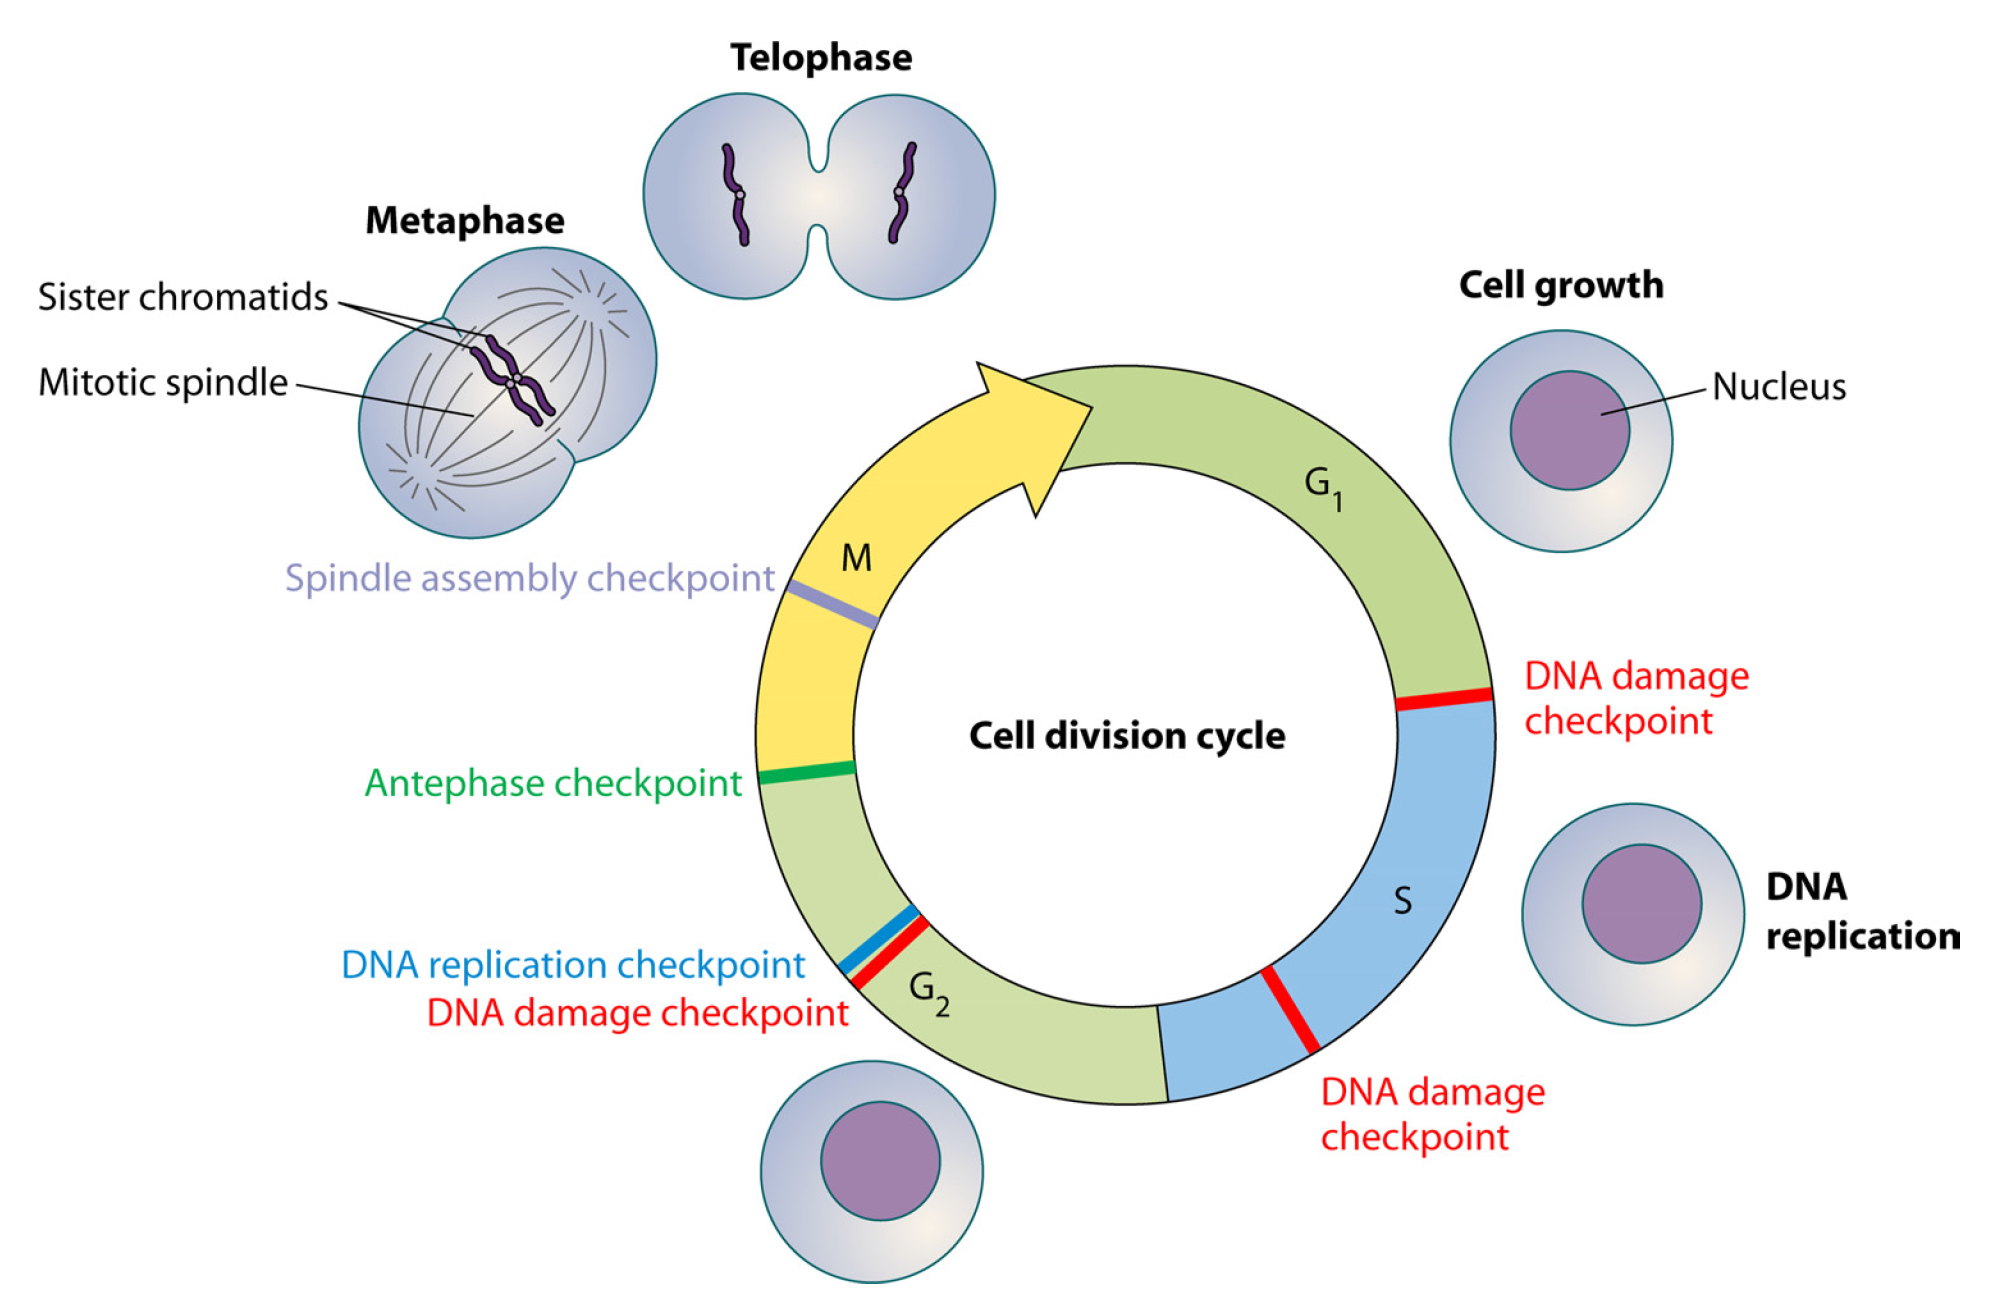 Figure 1 Cell cycle checkpoint pathways impinging upon the cell division cycle. (Chin, 2010)